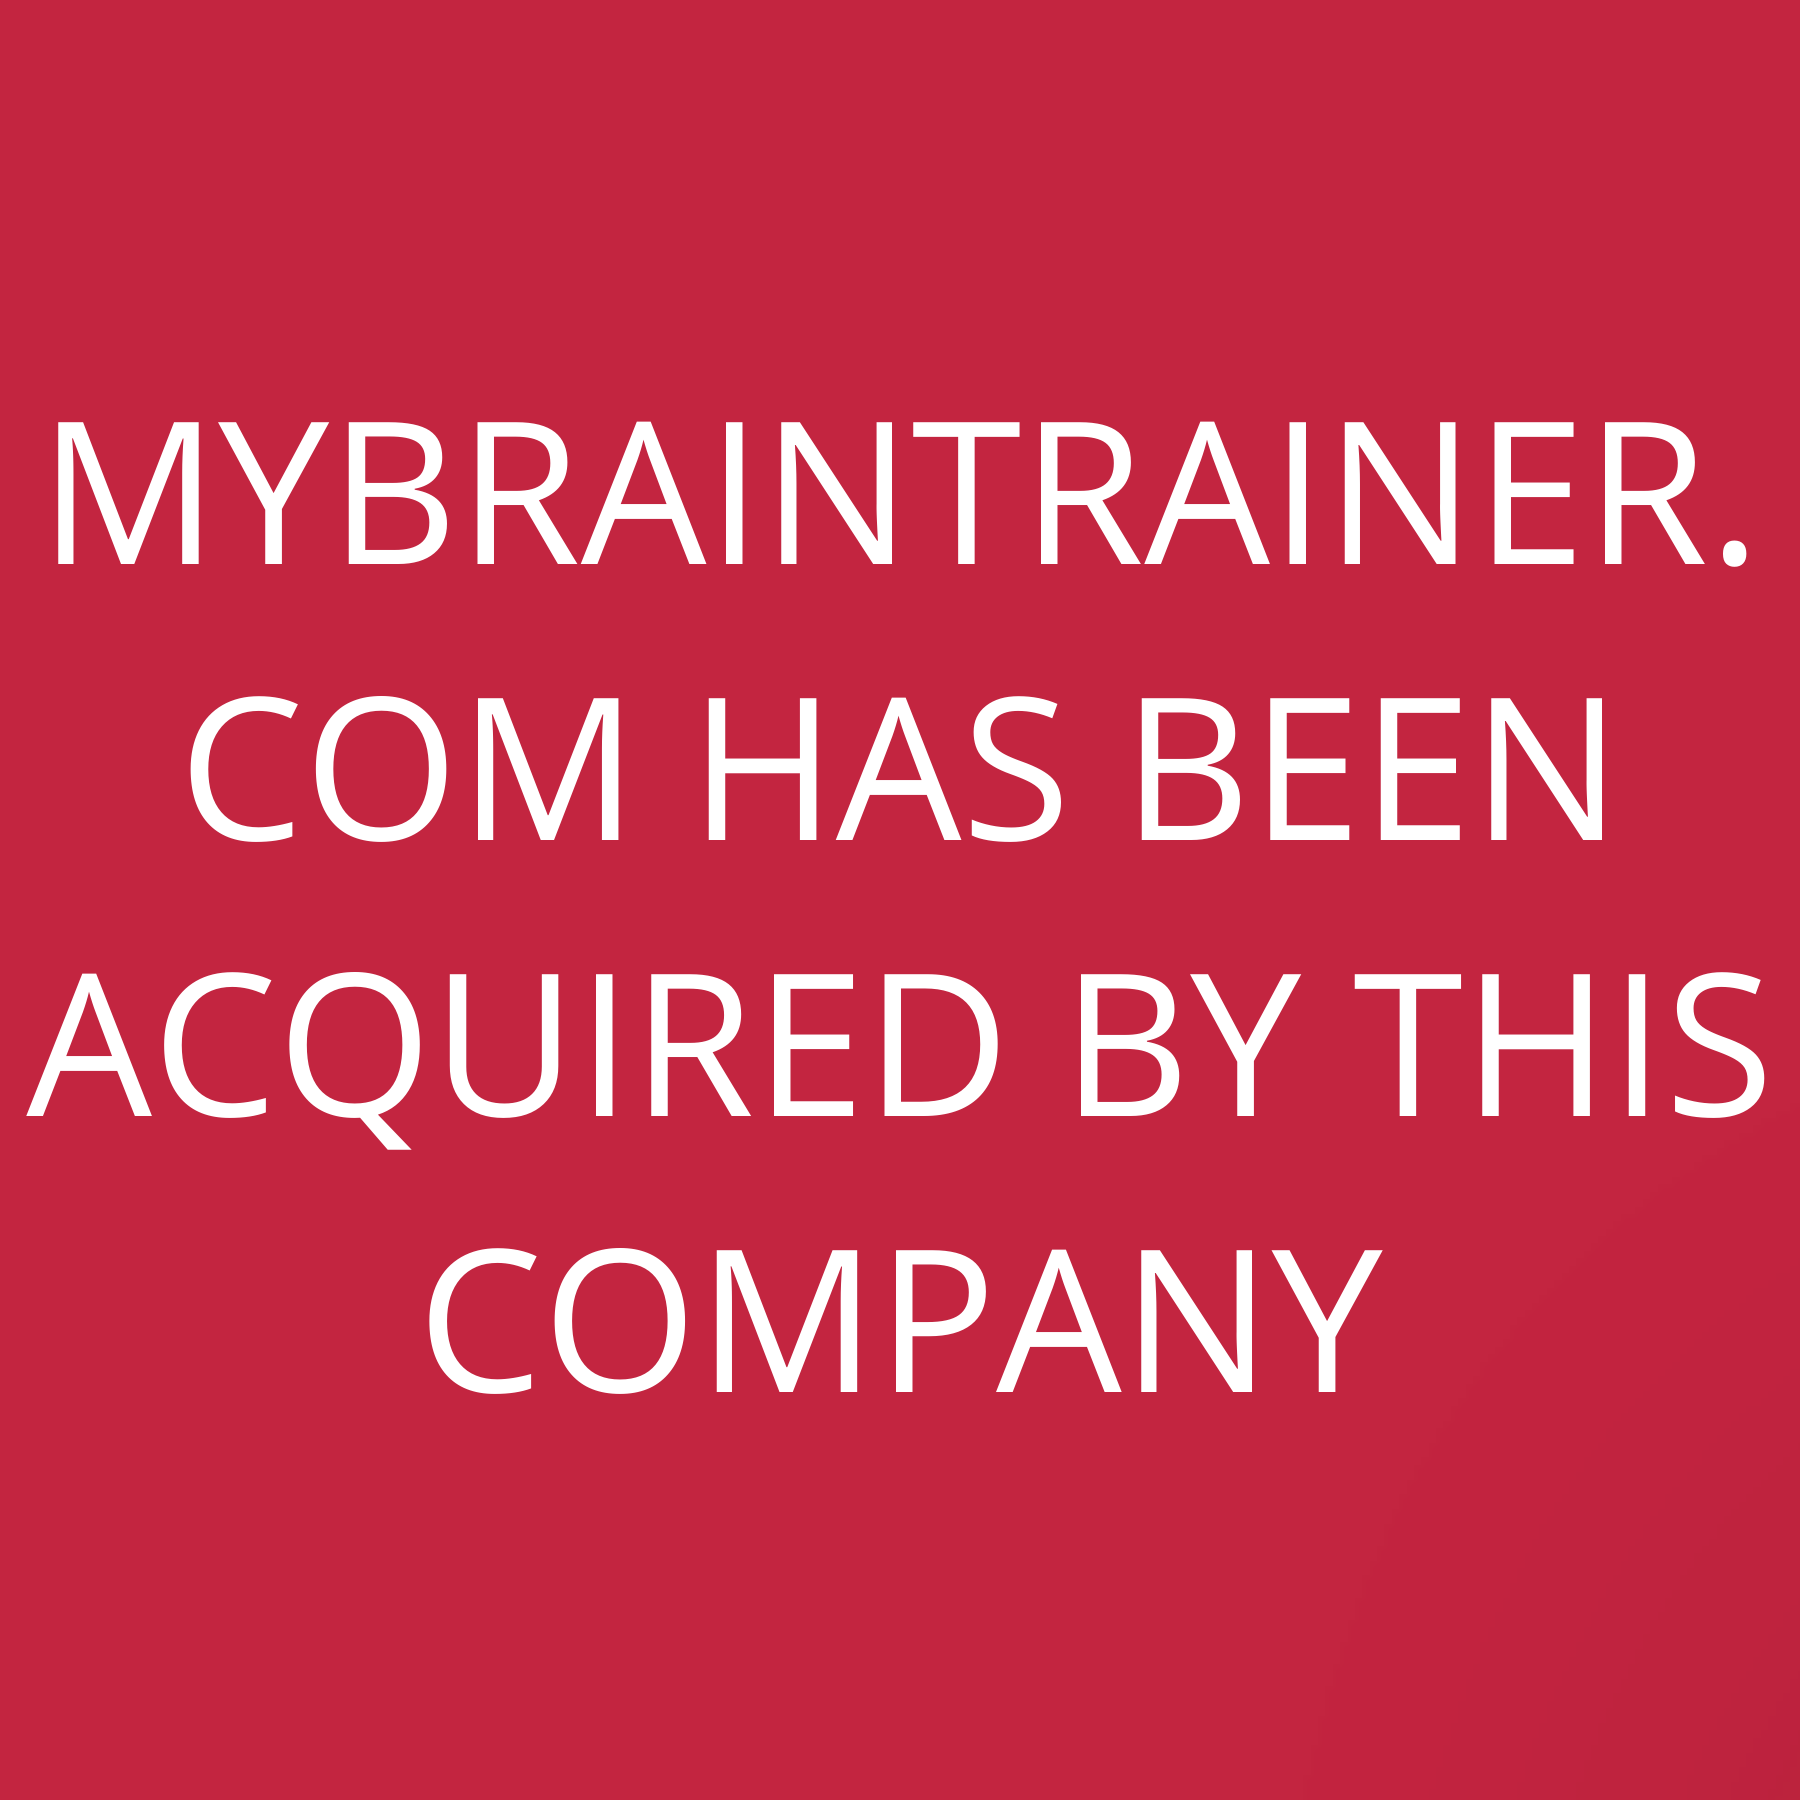 MyBrainTrainer.com has been acquired by this company